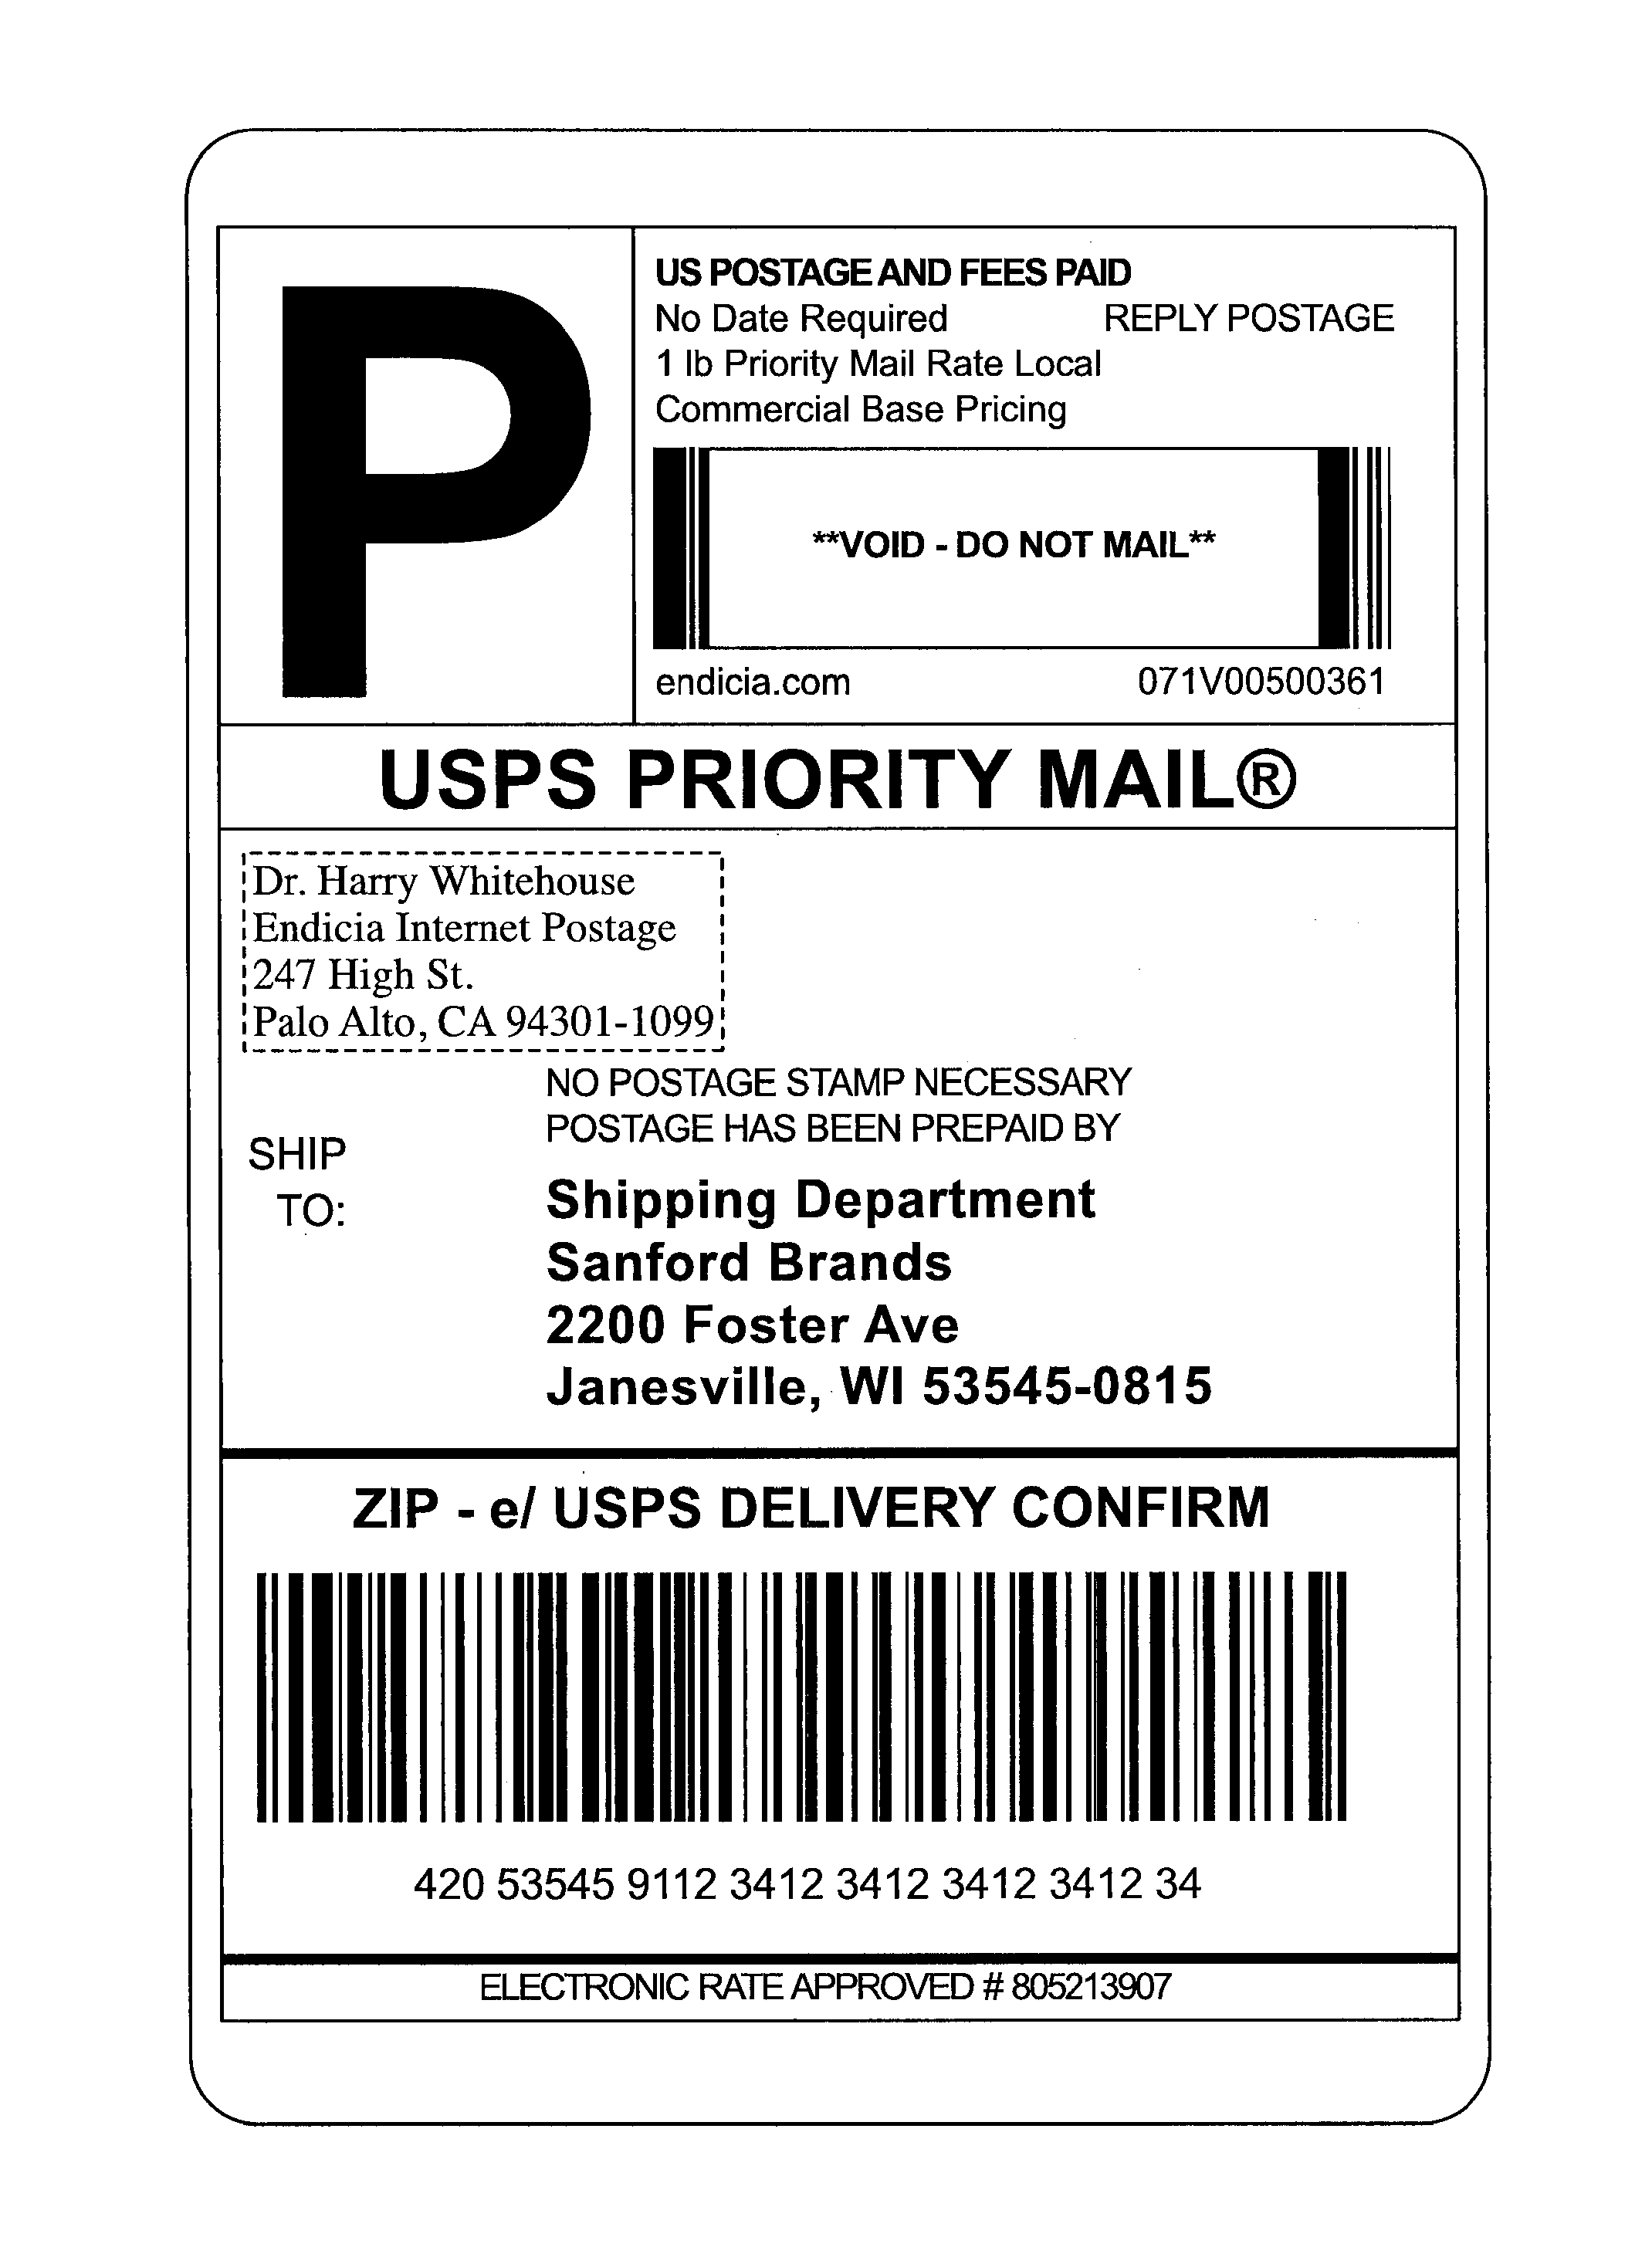 20 Priority Mail Label 20 Template - Label Design Ideas 20 For Online Shipping Label Template